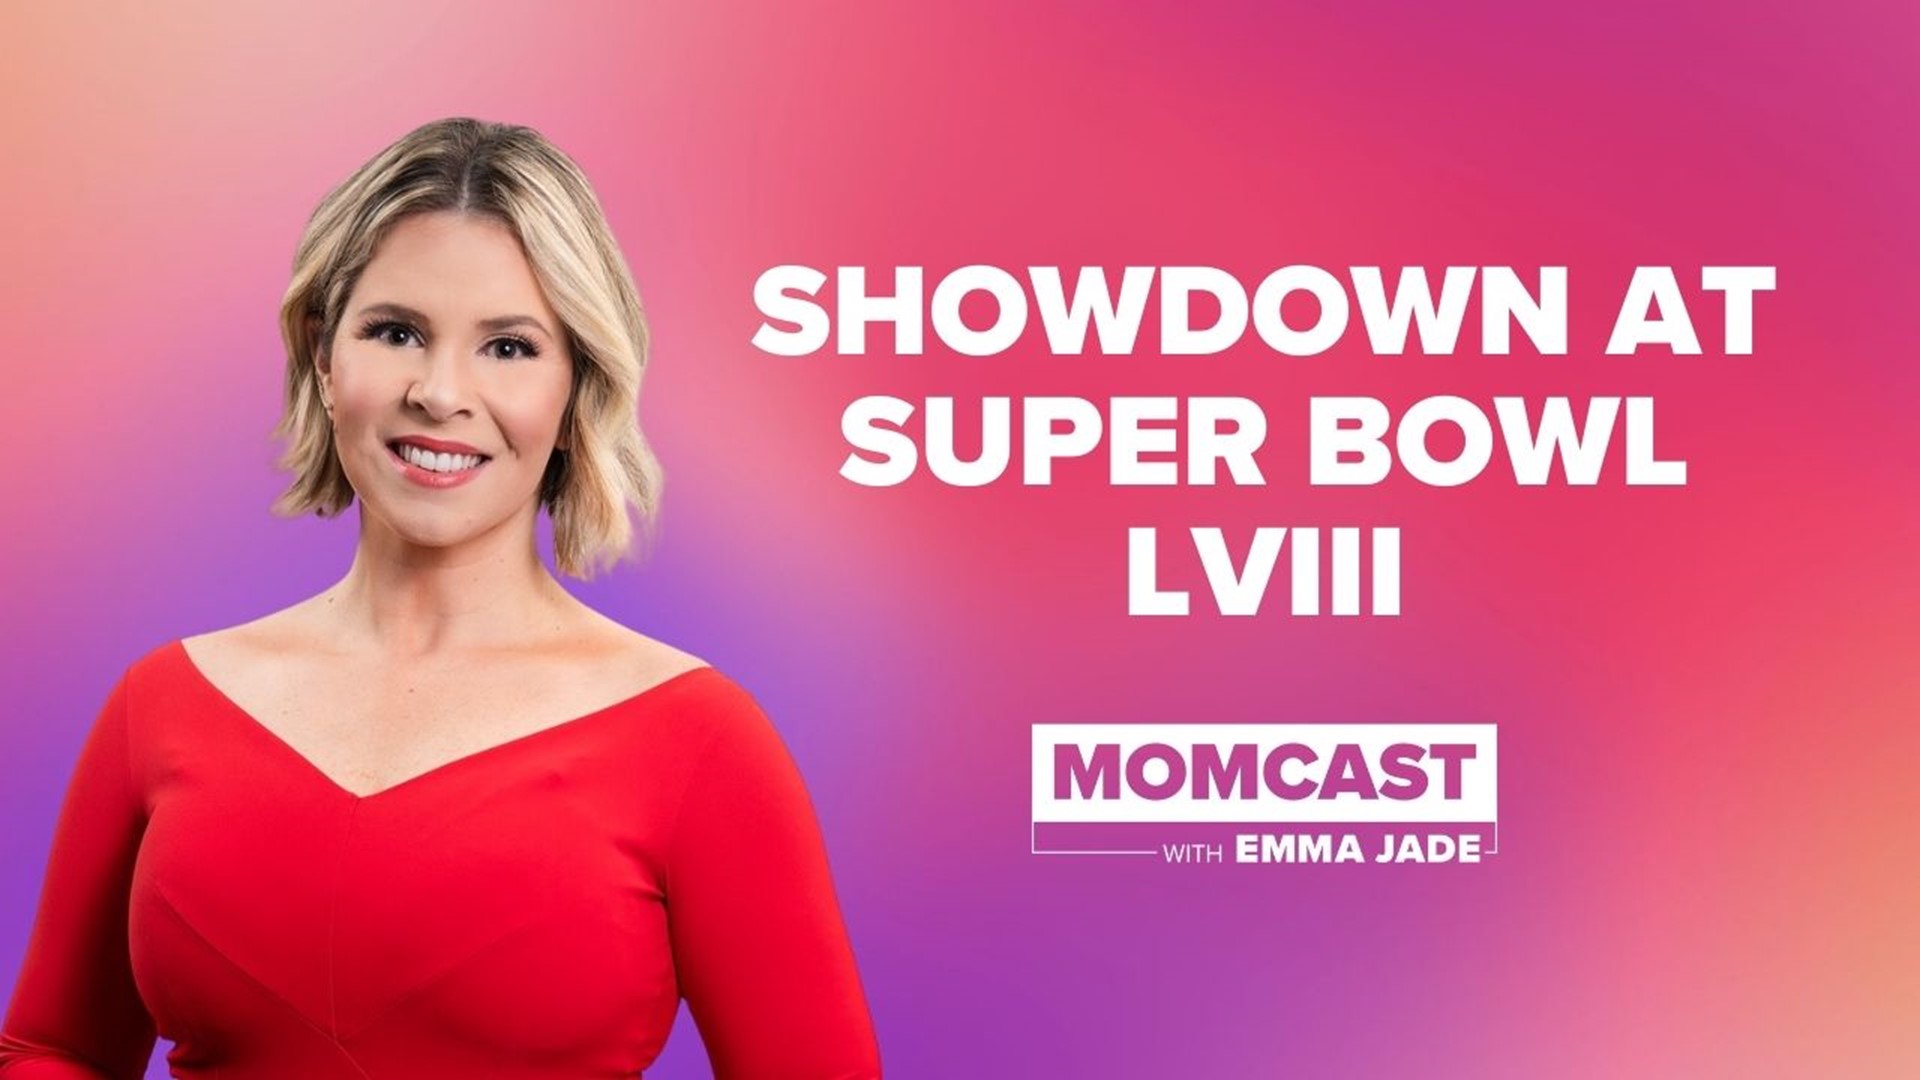 Before the 49ers take on the Chiefs Sunday, MOMCAST with Emma Jade lays out the stats you need to know that will set you apart at your Super Bowl party.